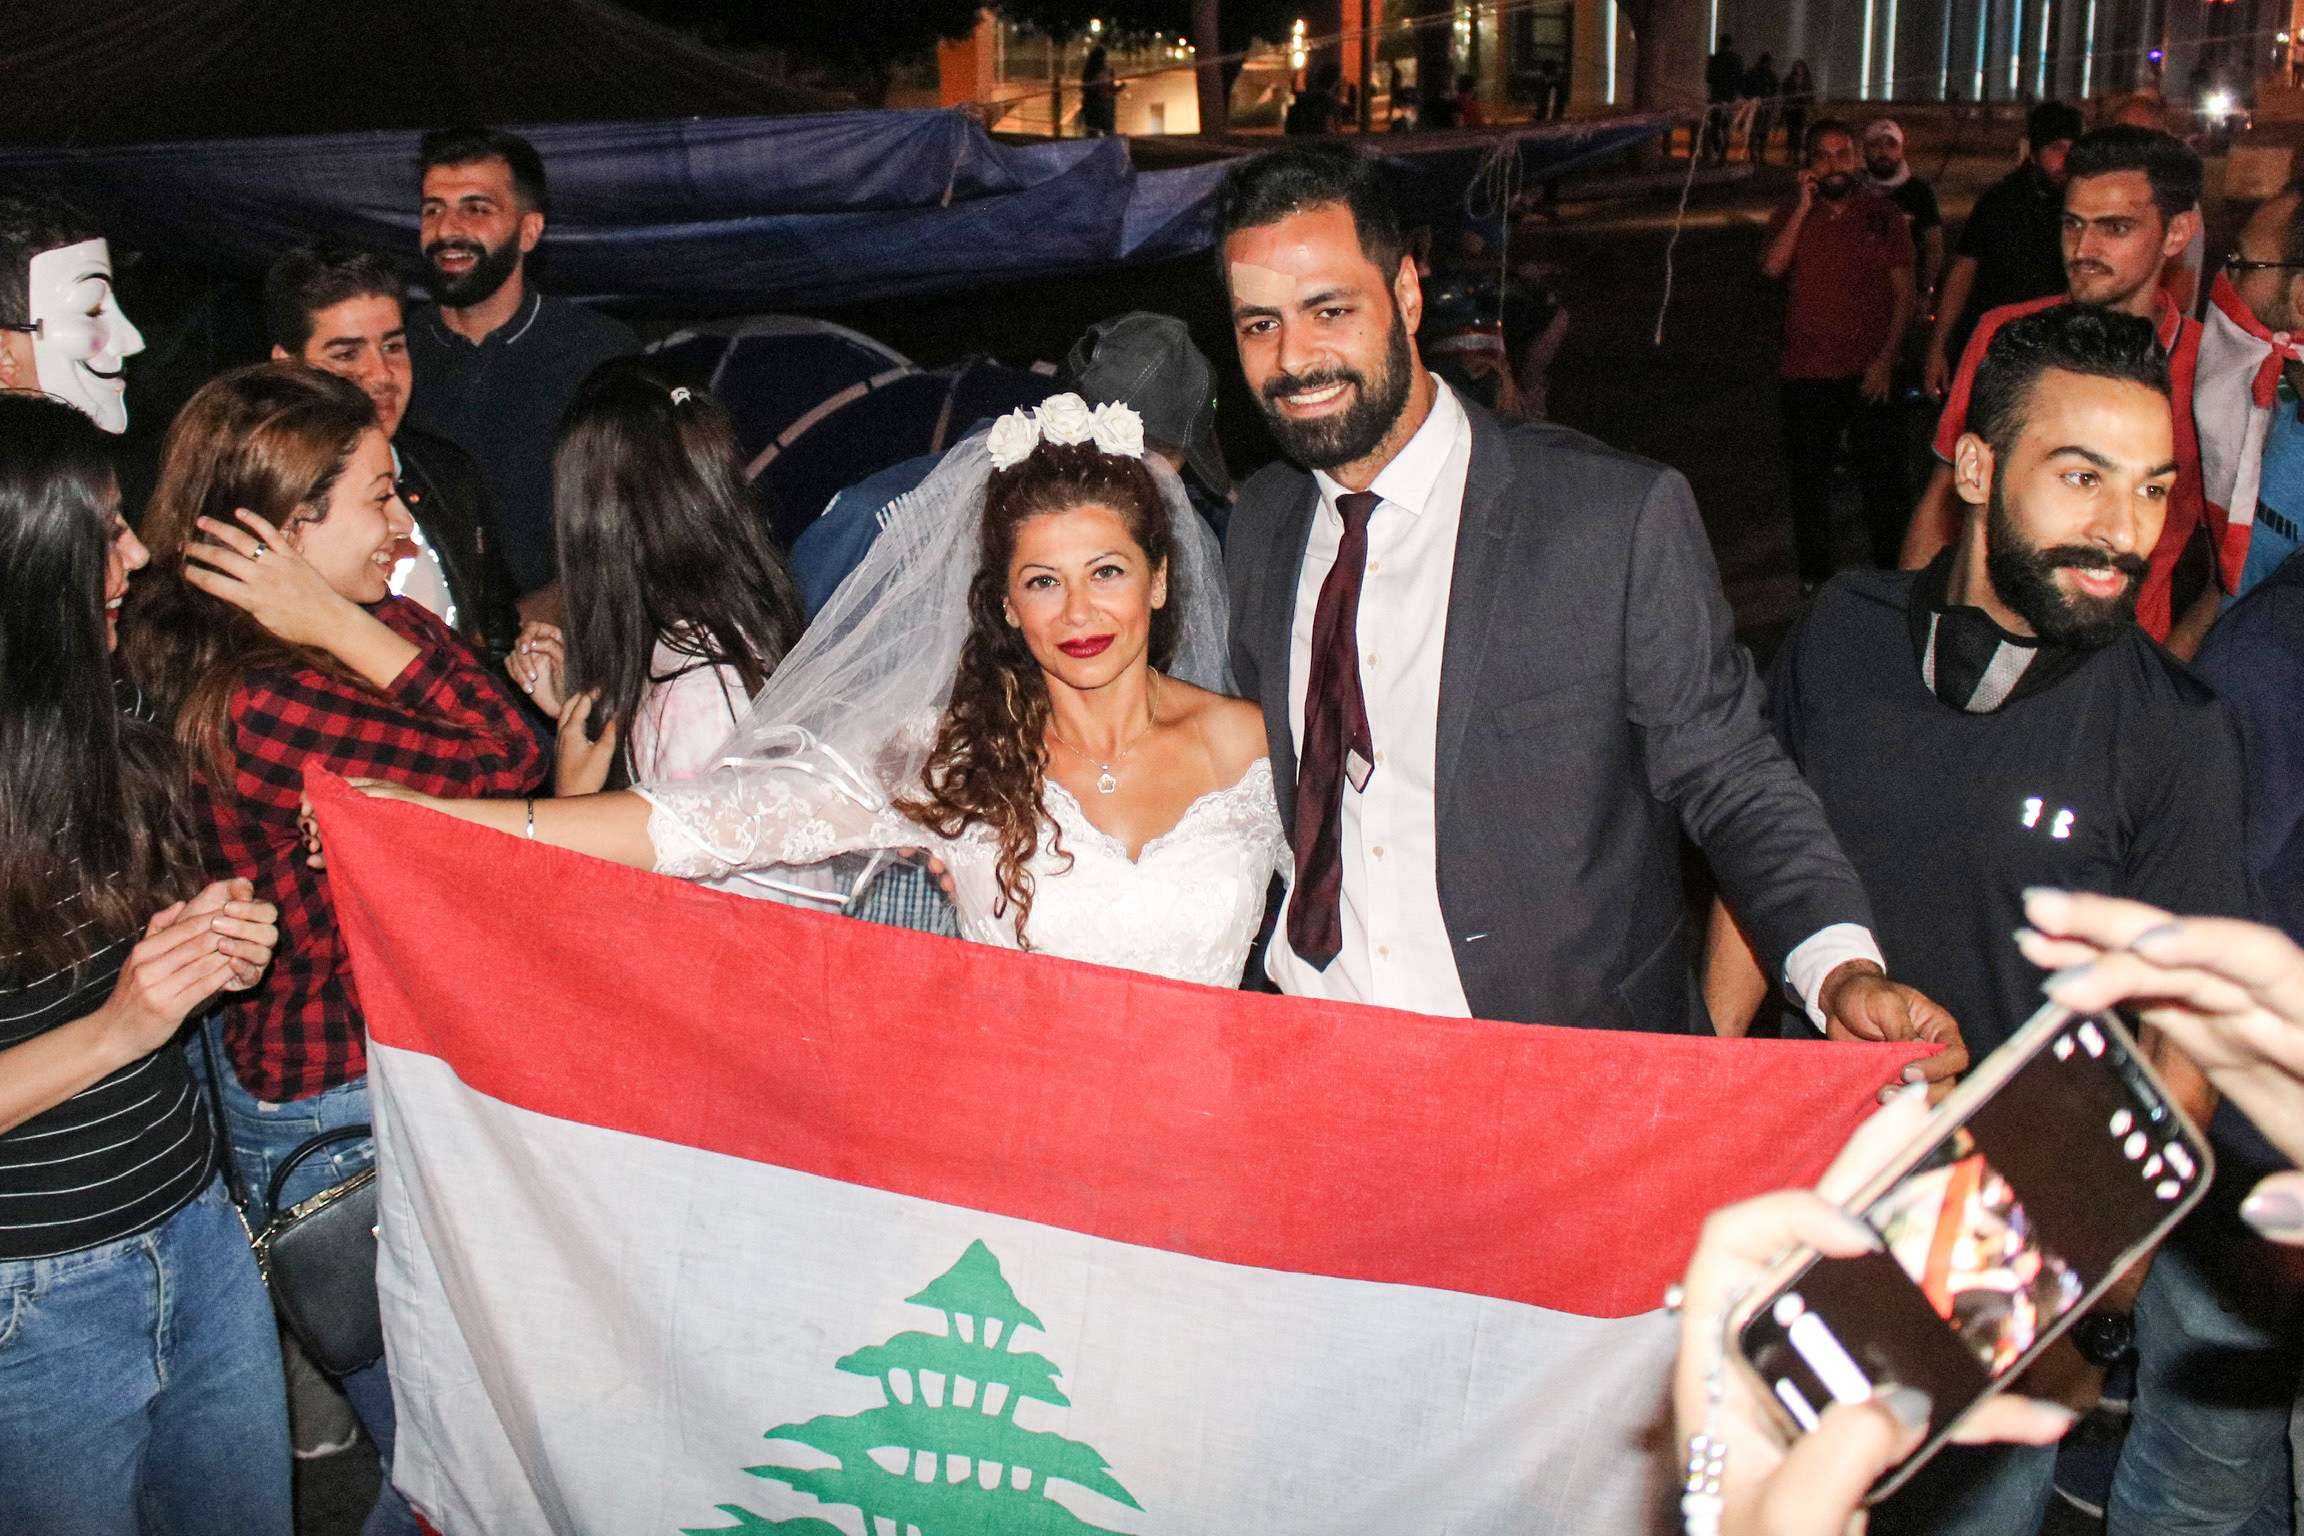 Malak Alaywe Herz poses for a picture alongside her newly-wed husband Mohammad at Riad al-Solh square in Beirut